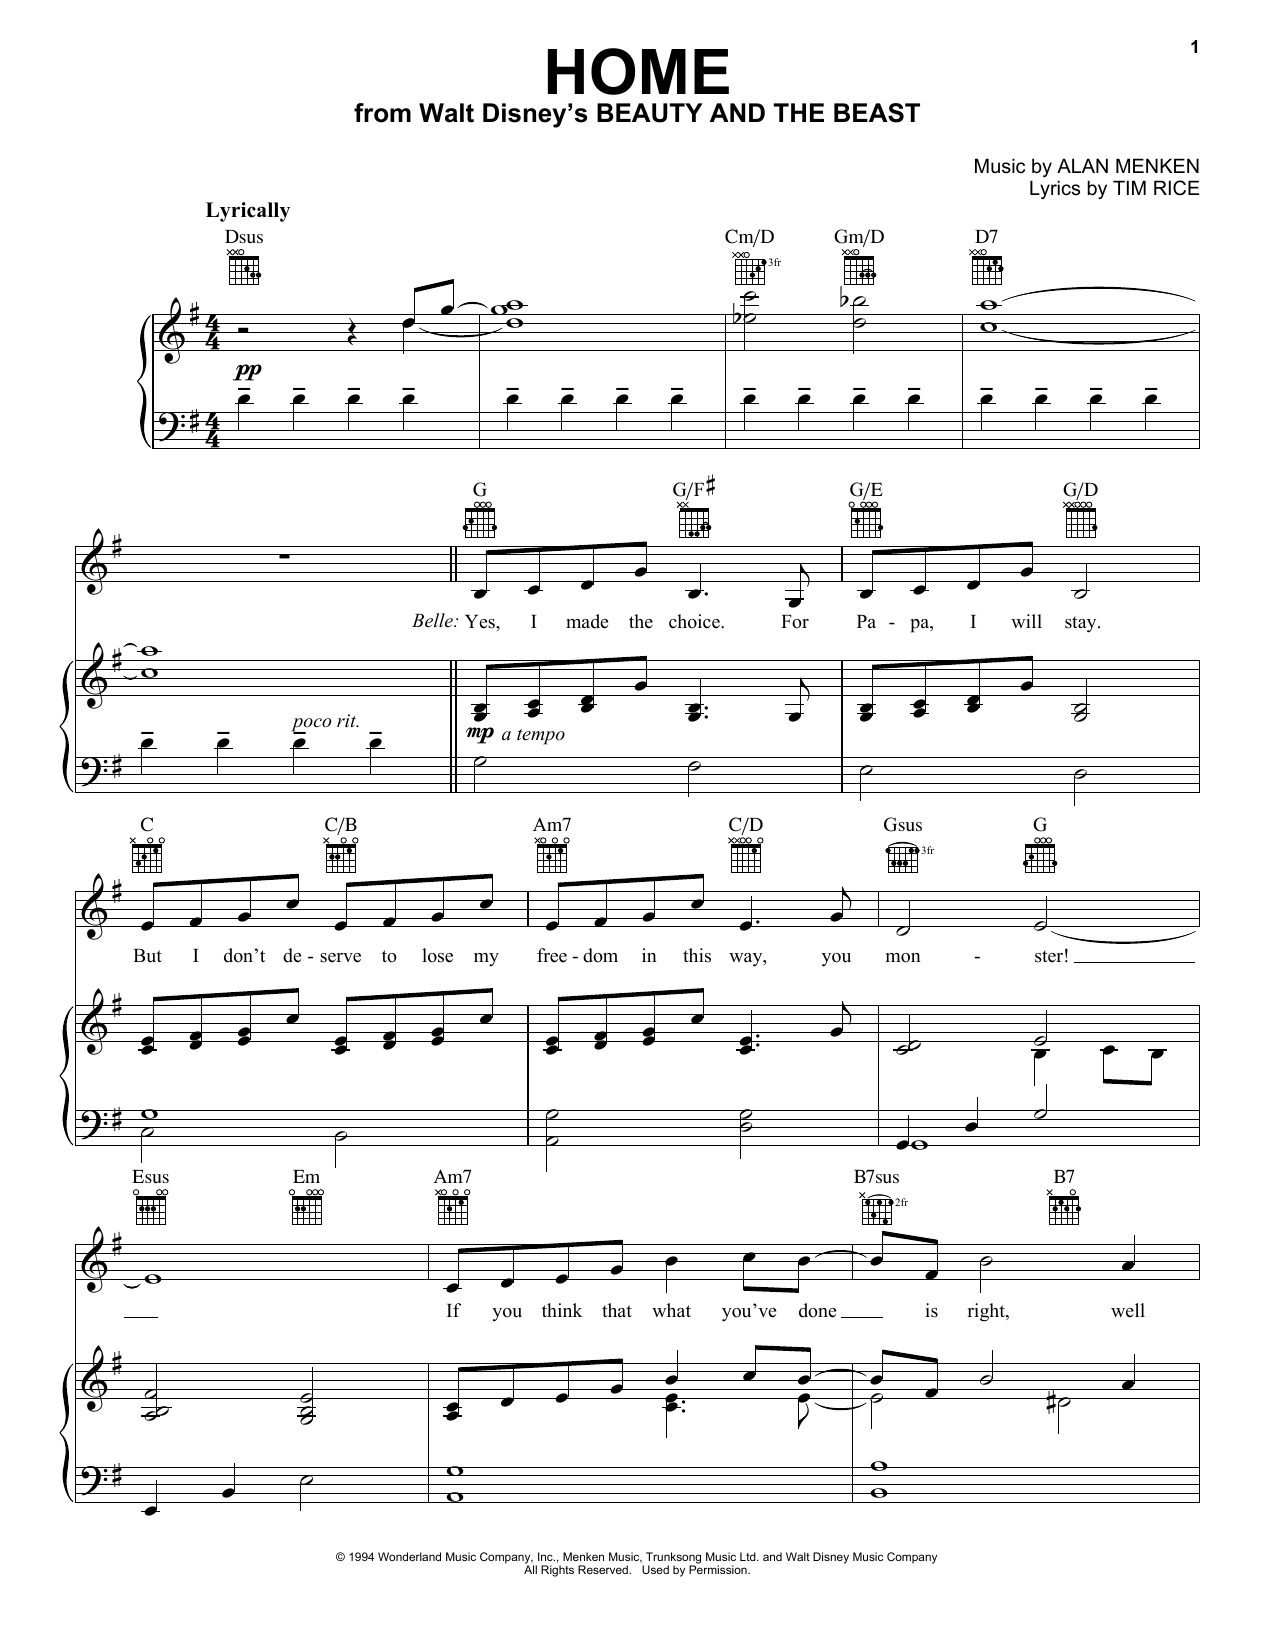 Alan Menken Home (from Beauty and the Beast: The Broadway Musical) sheet music notes and chords. Download Printable PDF.